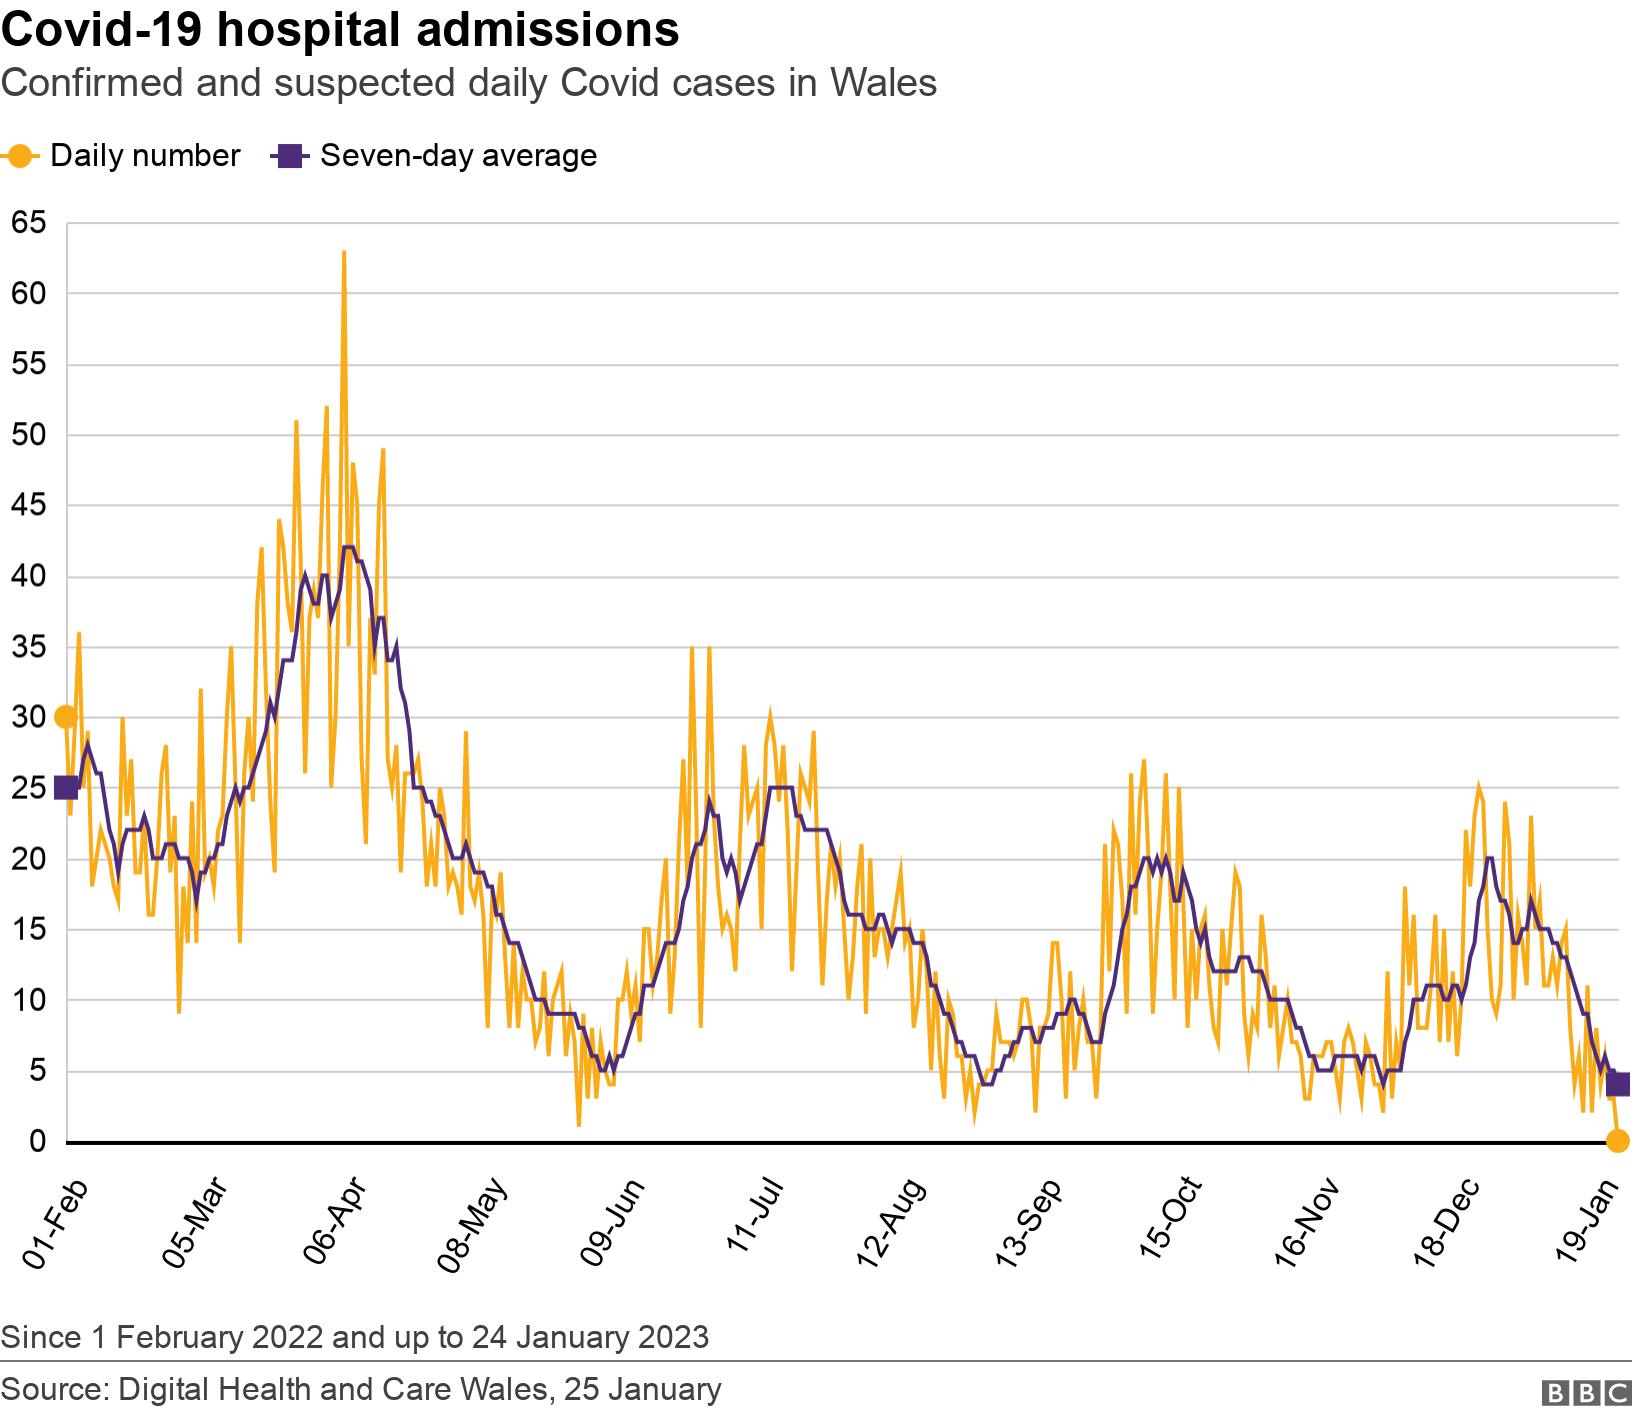 Covid-19 hospital admissions. Confirmed and suspected daily Covid cases in Wales.  Since 1 February 2022 and up to 24 January 2023.